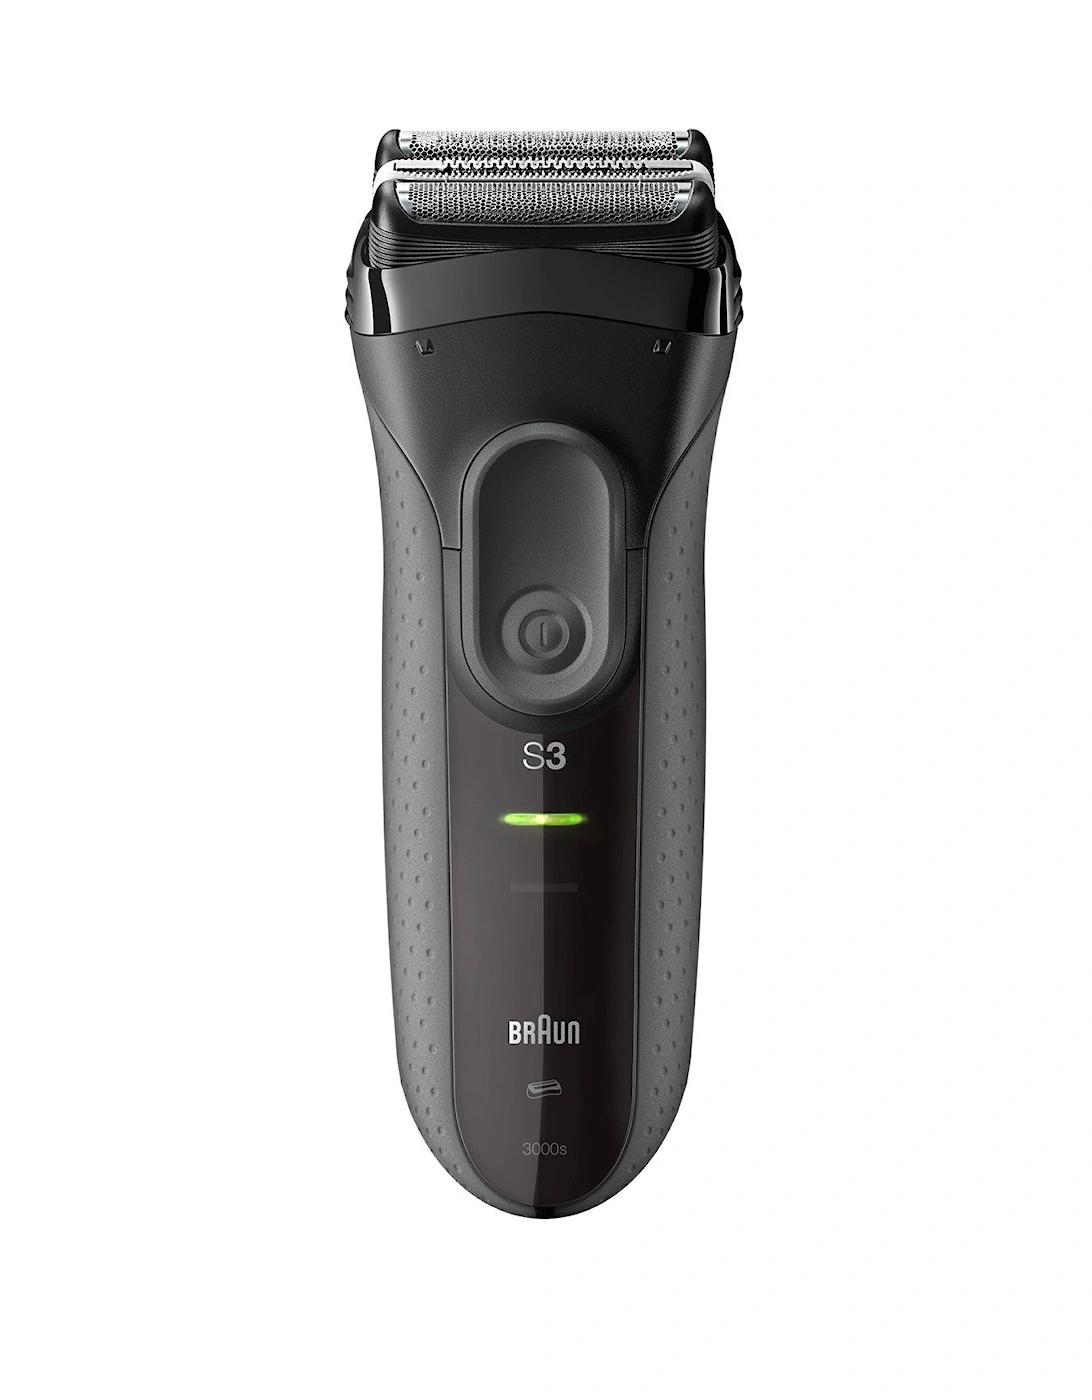 Series 3 ProSkin 3000s Electric Shaver, Black - Rechargeable Electric Razor, 2 of 1